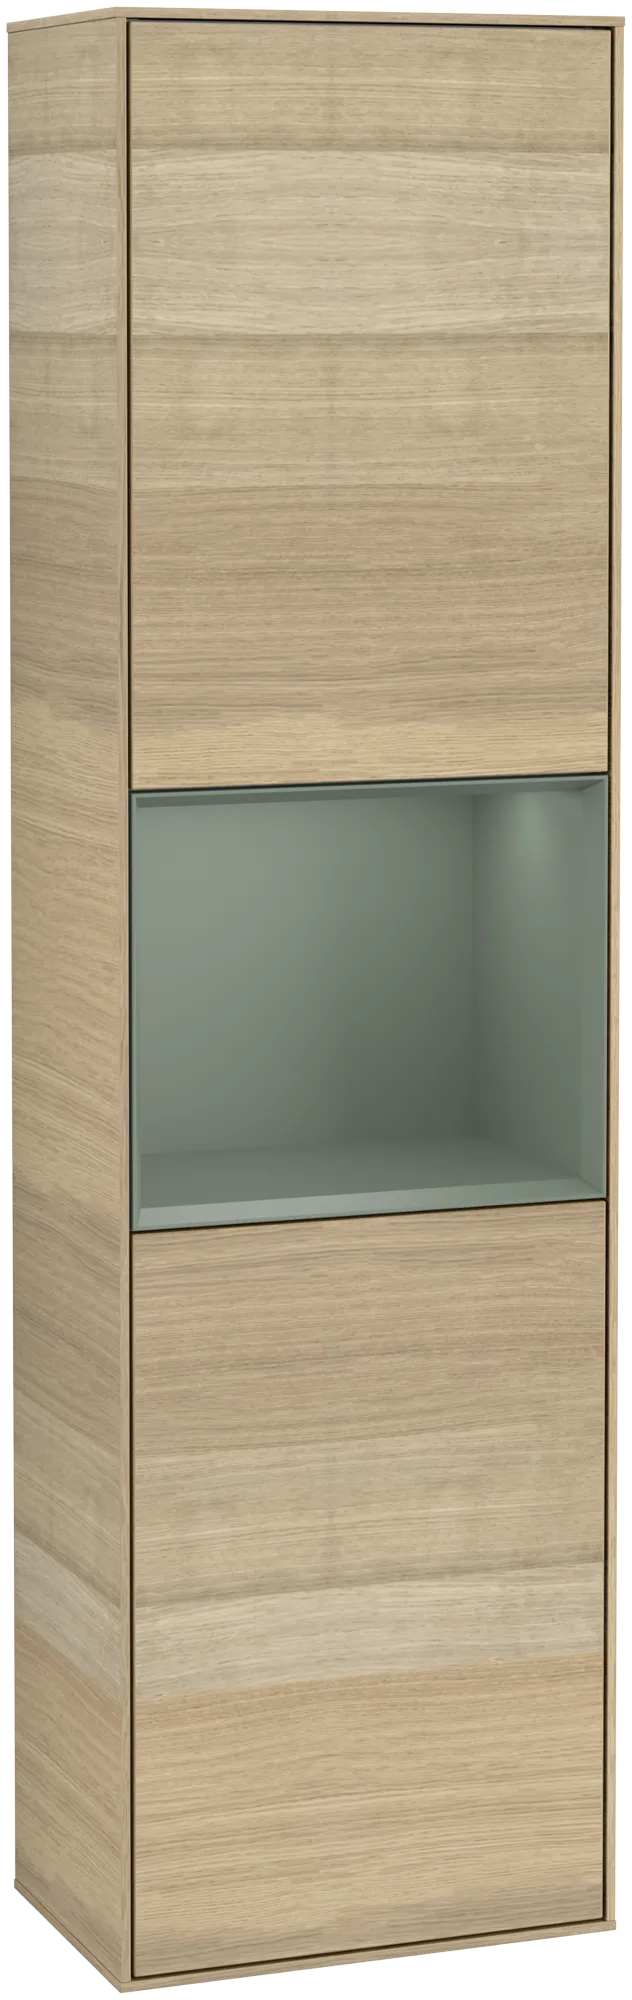 Picture of VILLEROY BOCH Finion Tall cabinet, with lighting, 2 doors, 418 x 1516 x 270 mm, Oak Veneer / Olive Matt Lacquer #G460GMPC